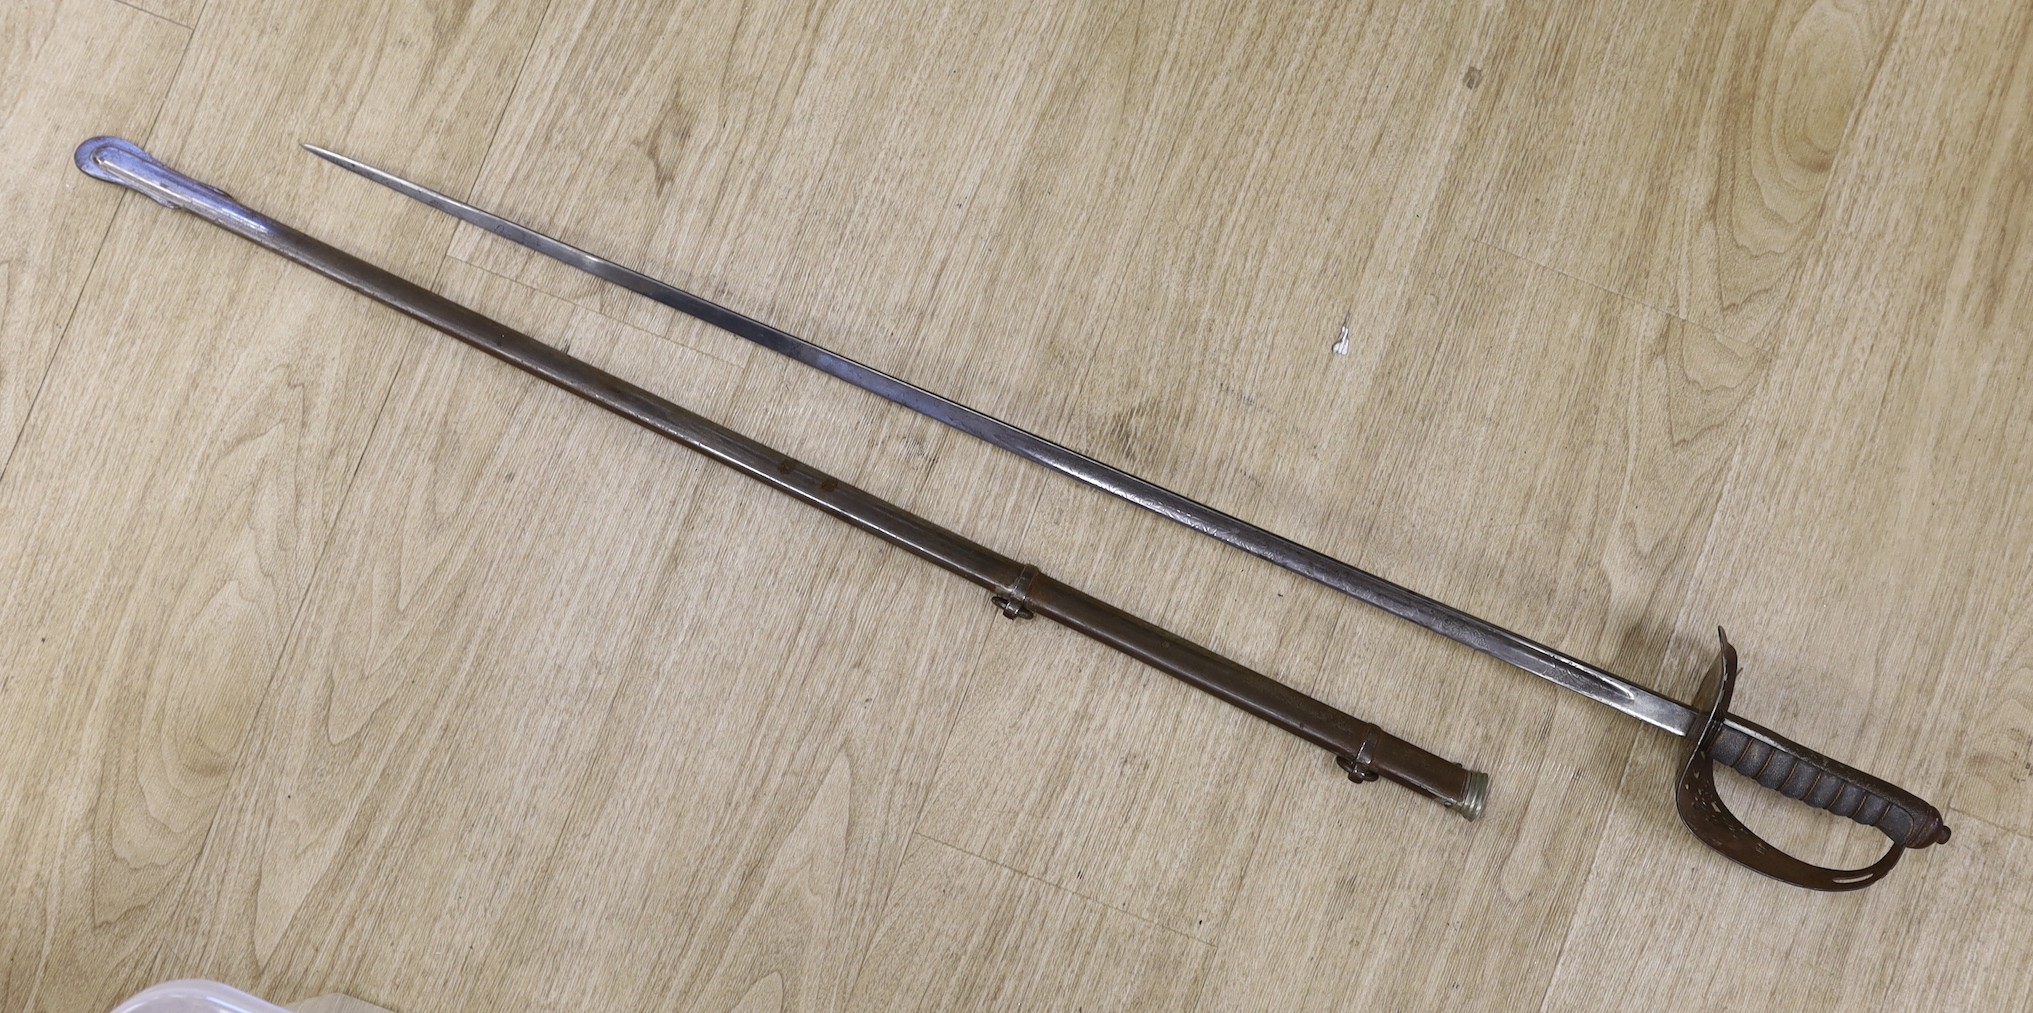 A George V officers sword with scabbard and a bayonet, sword100cm long